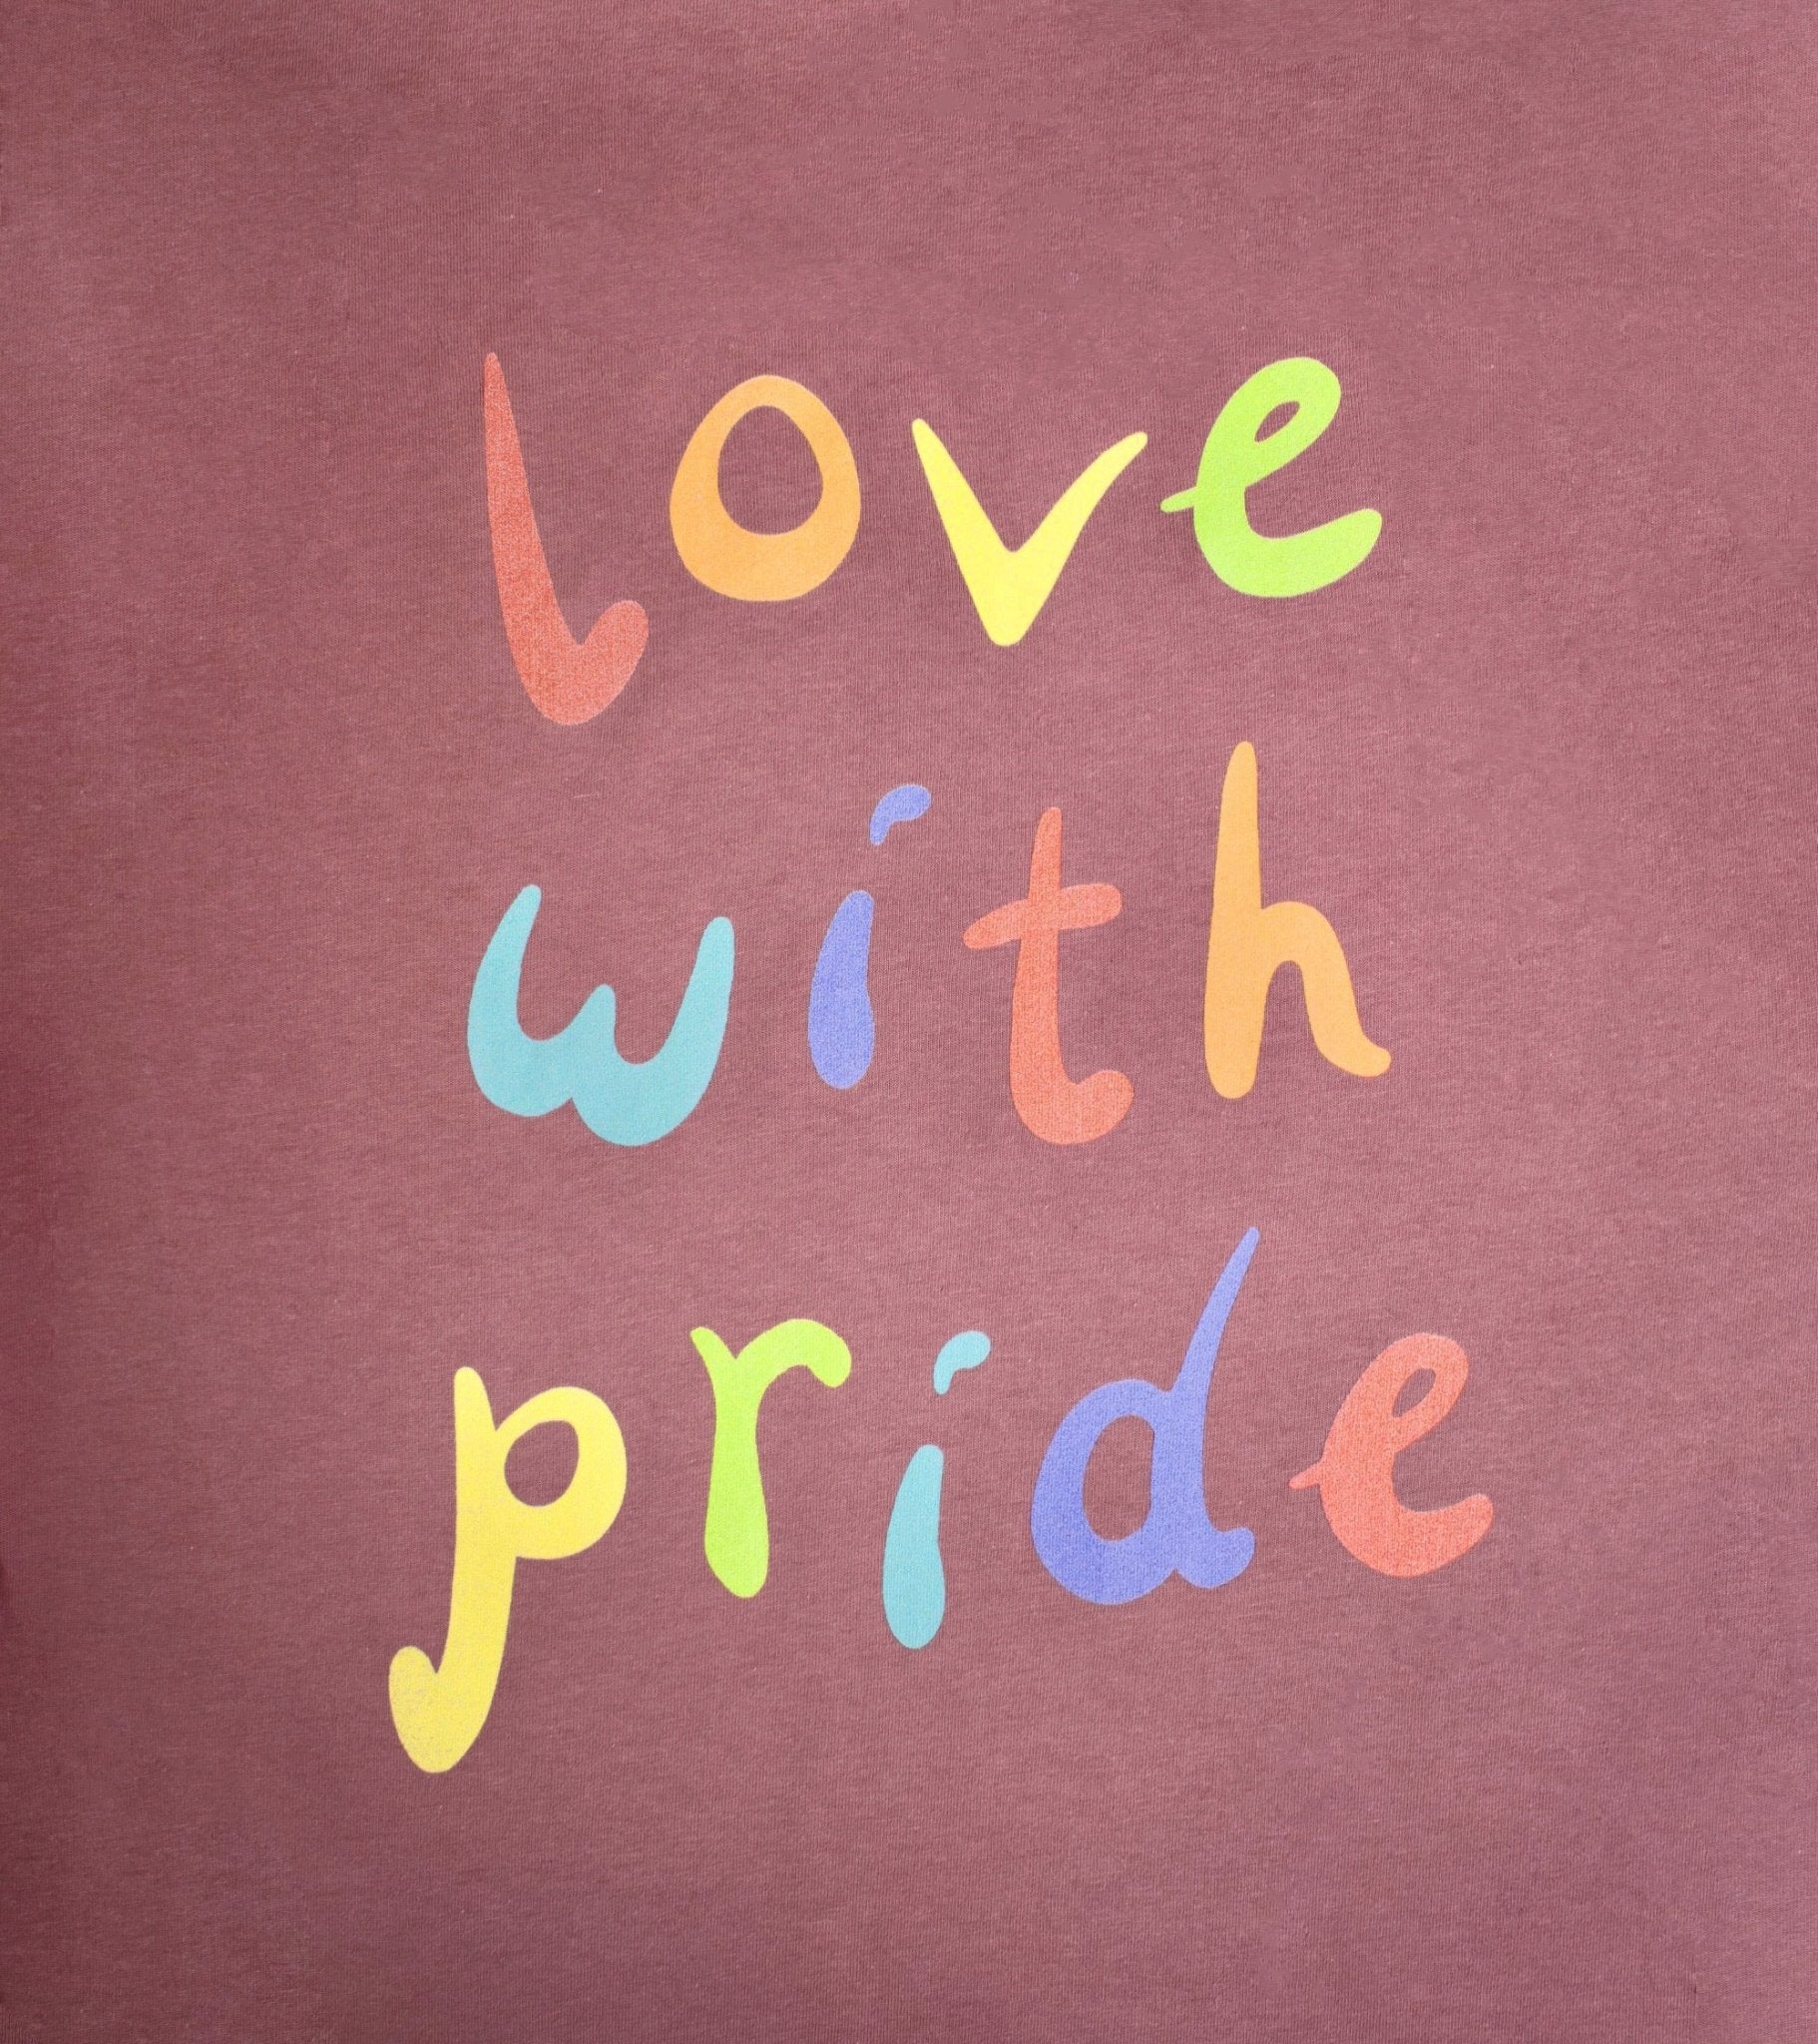 This is Fruity | T-Shirt - Love With Pride Apparel